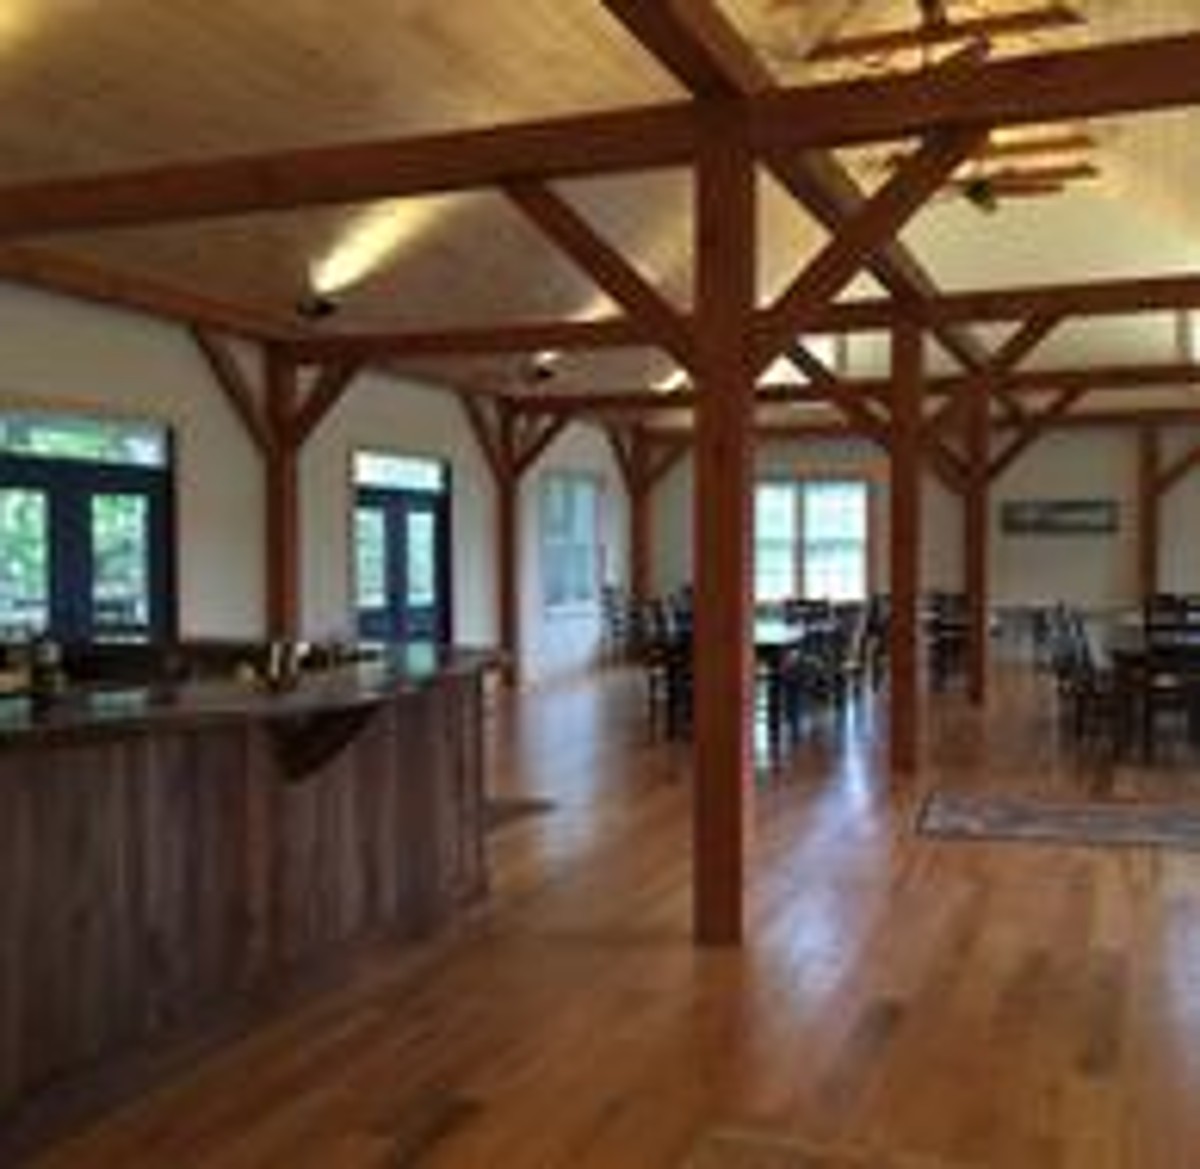 Zephaniah's new timber frame barn is a great venue for groups, meetings, and wonderful events